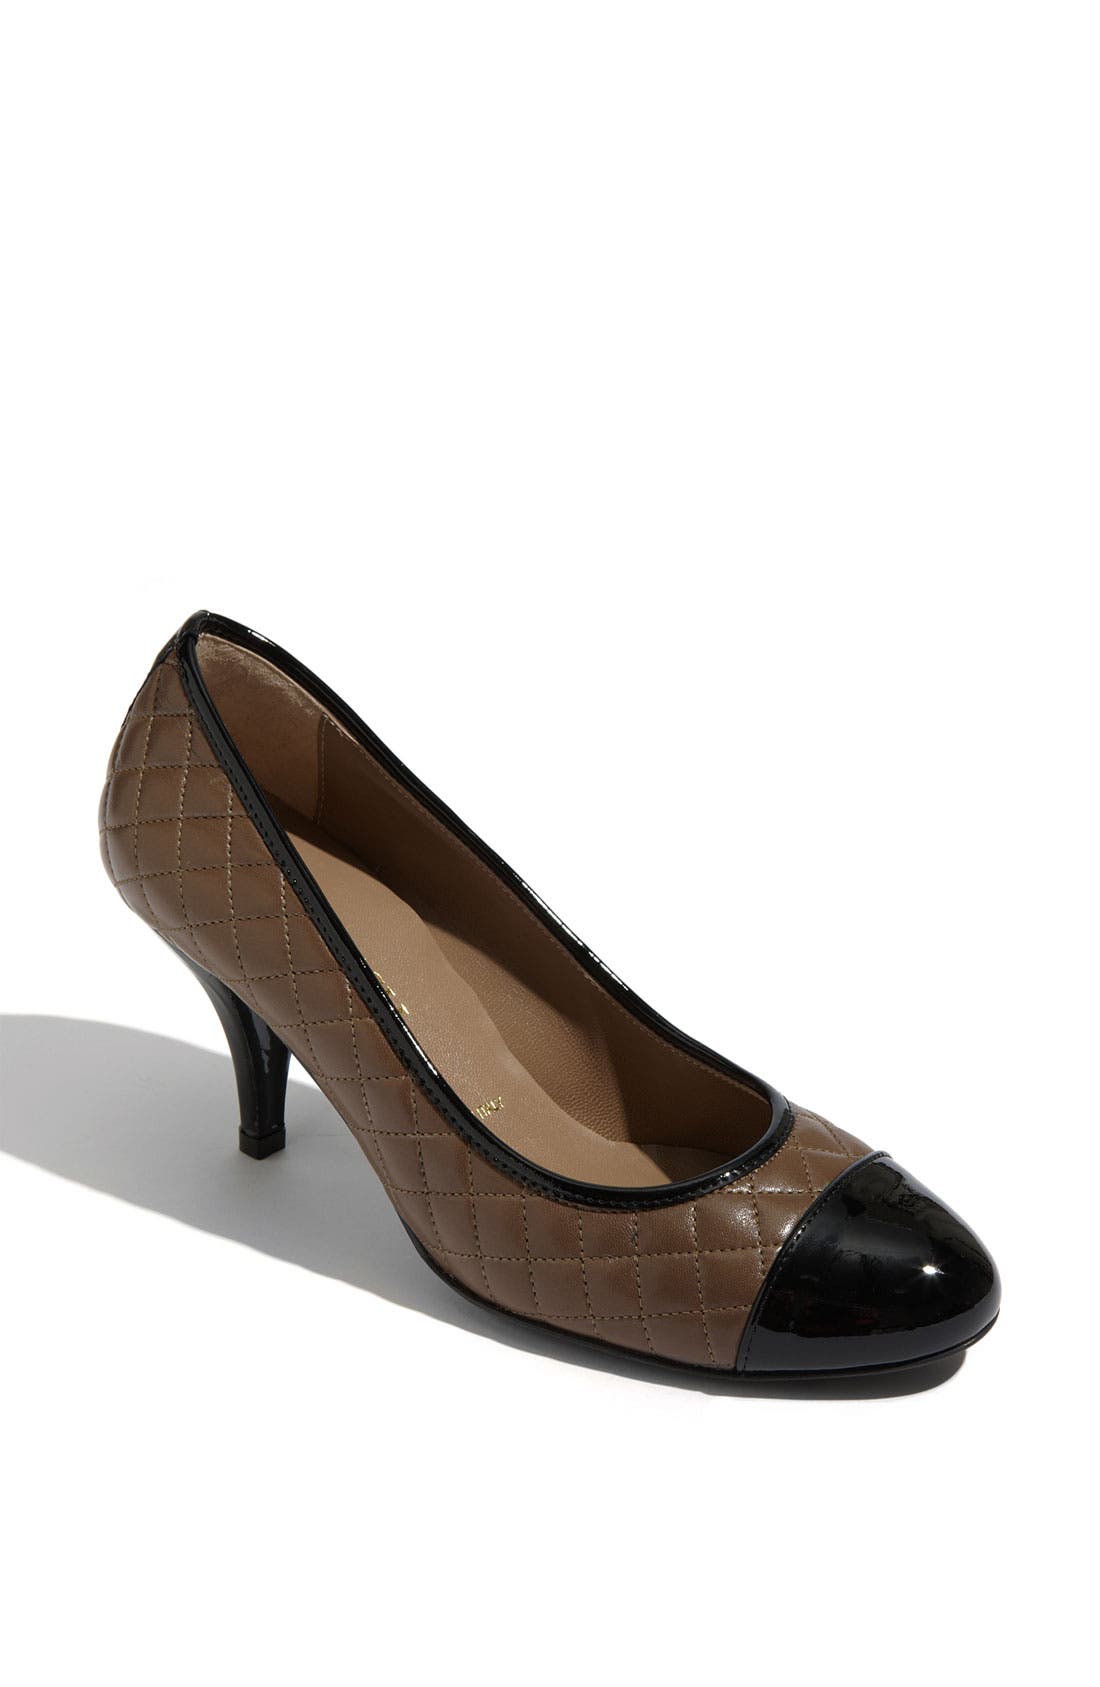 bruno magli women's shoes nordstrom